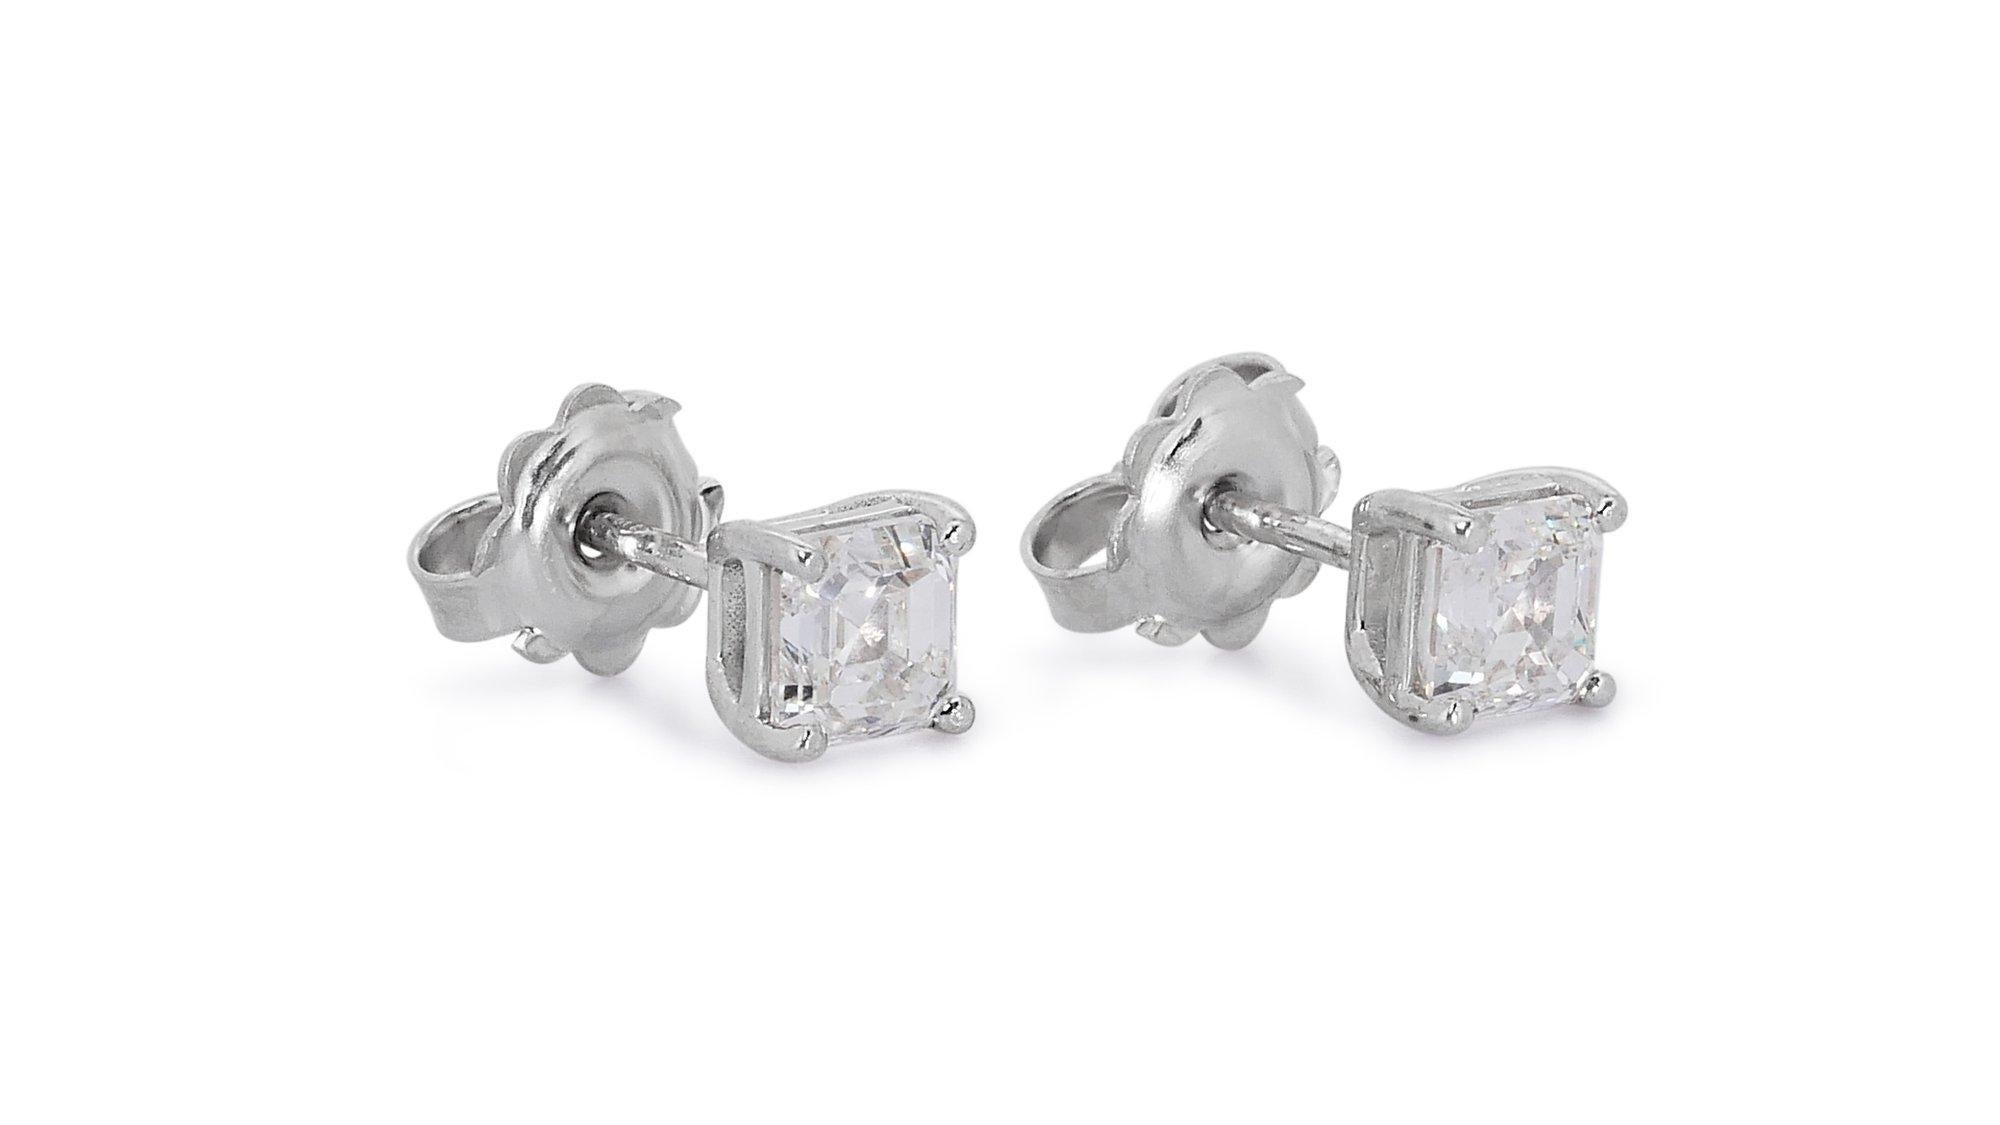 Square Cut Timeless 2.05ct Diamond Stud Earrings in 18k White Gold - GIA Certified For Sale